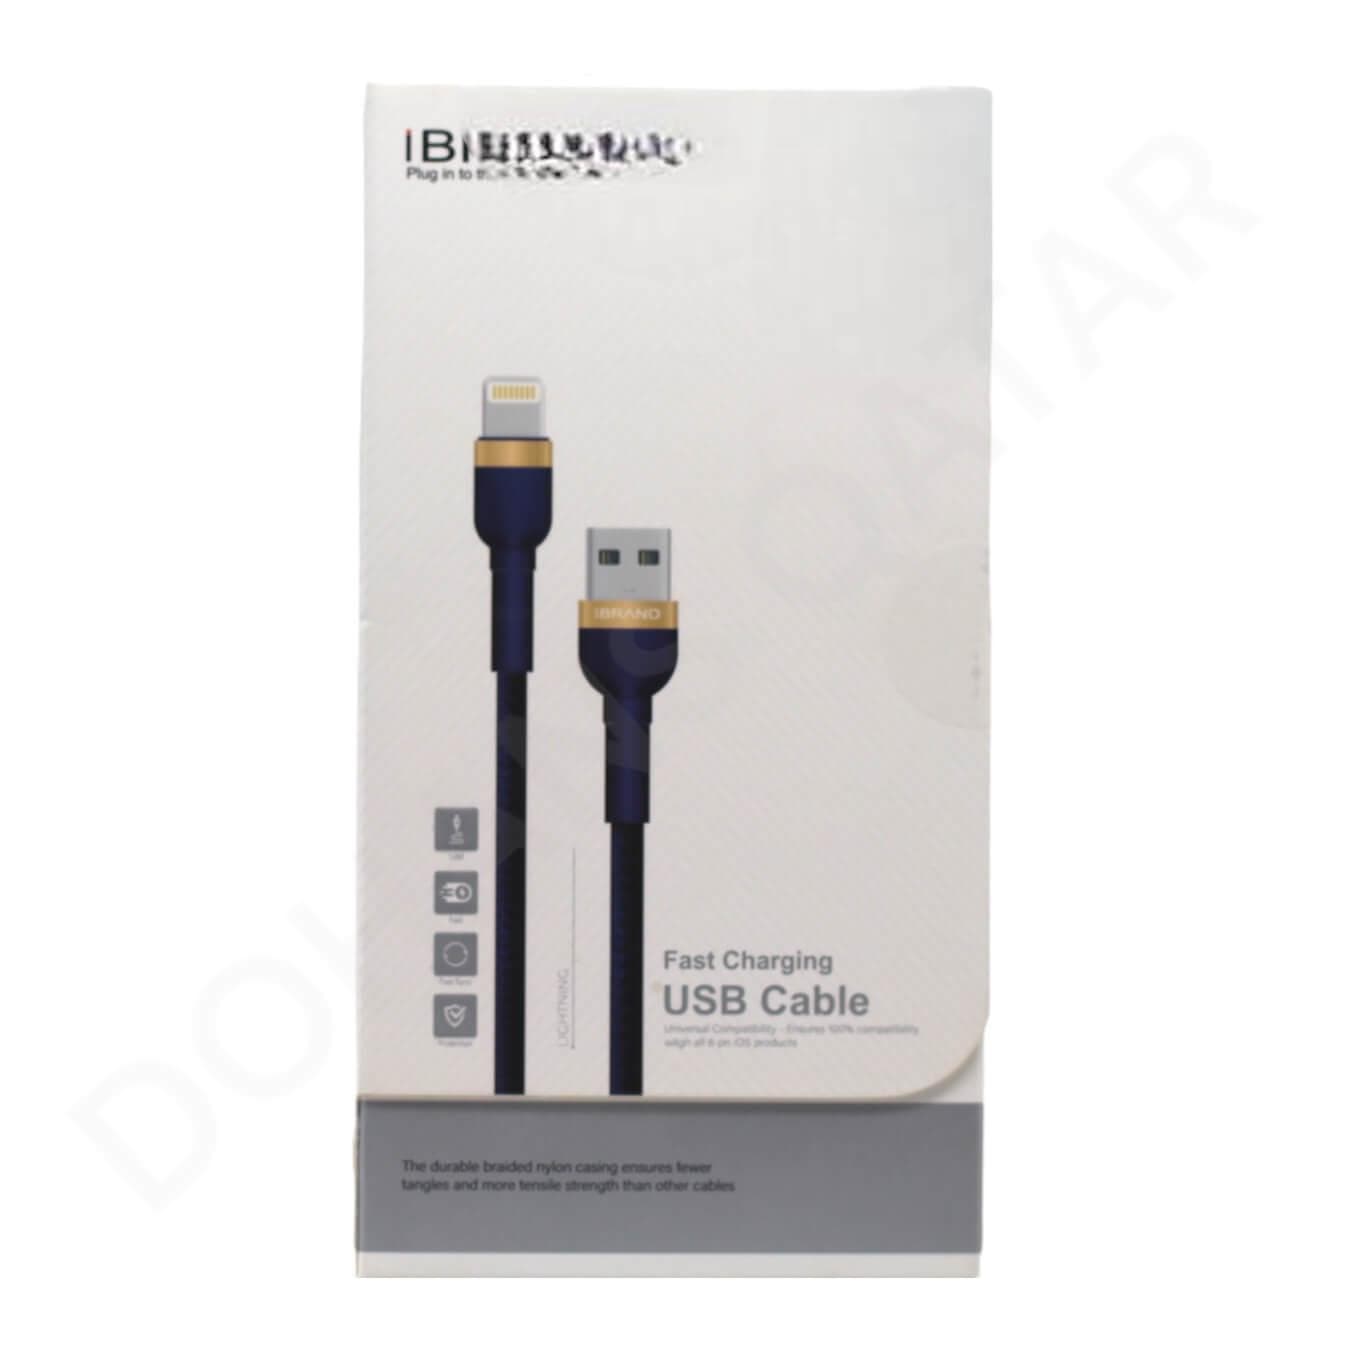 Buy SANDSTROM Black Series USB Type-C to HDMI Cable - 1 m